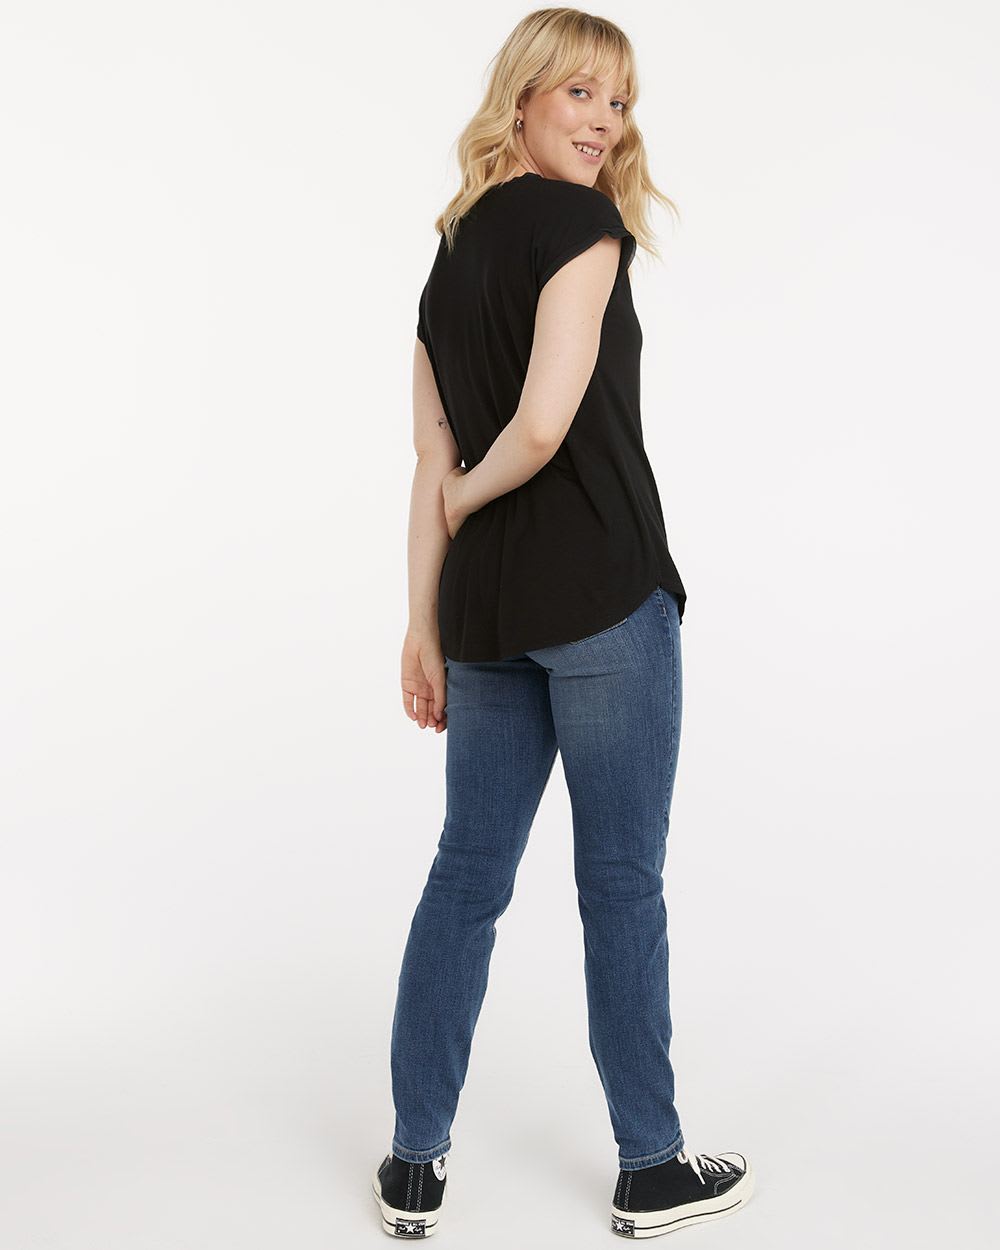 Solid V-Neck Tunic with Short Sleeves